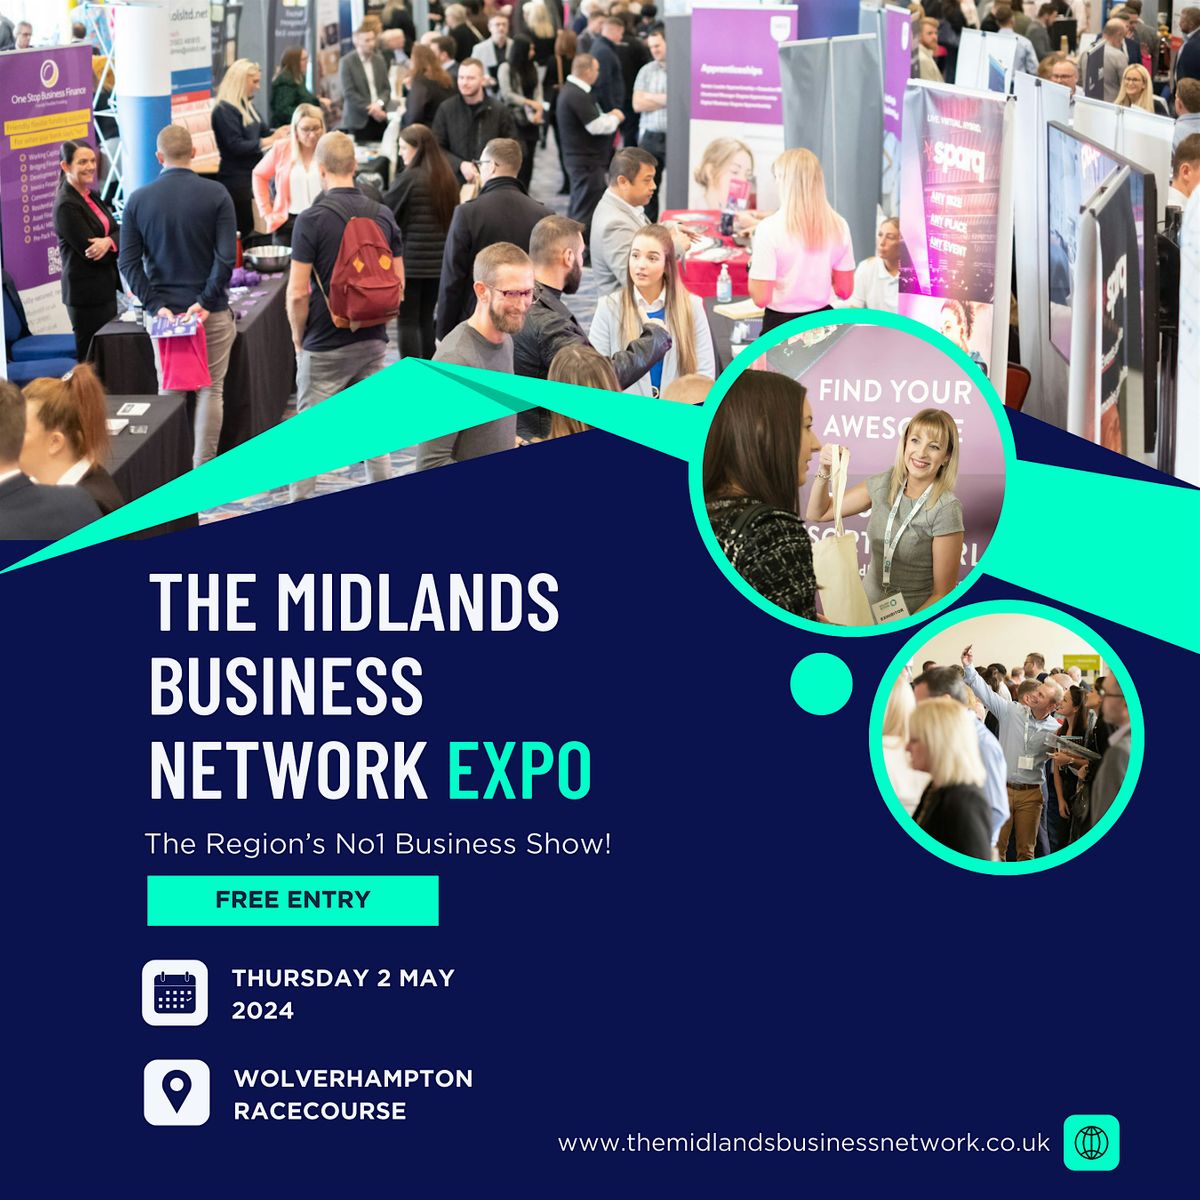 The Midlands Business Network Expo